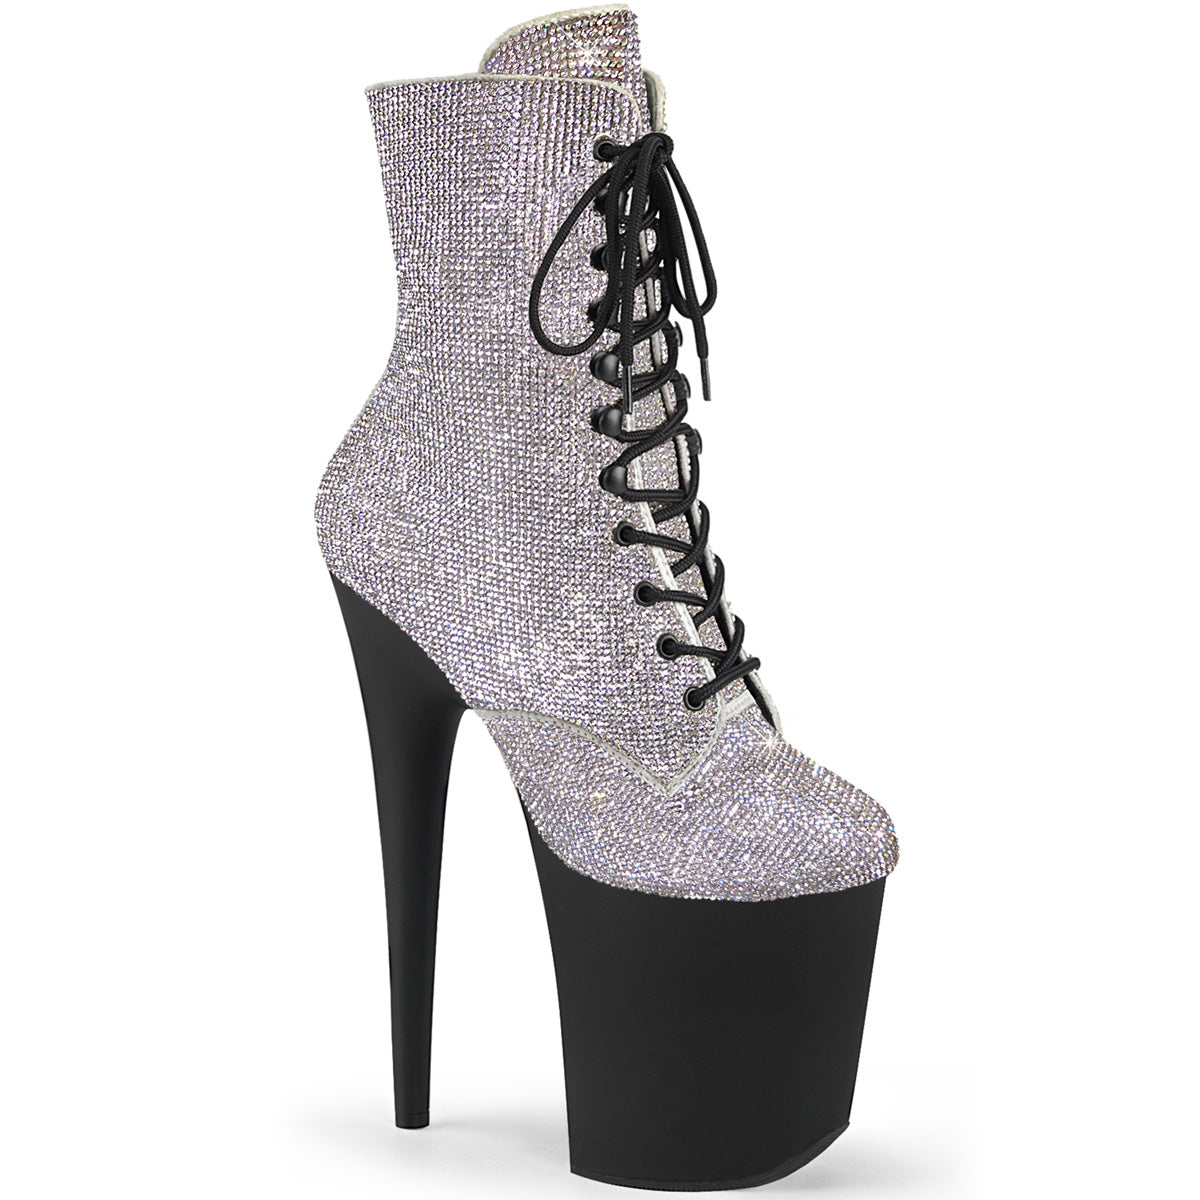 Pleaser FLAMINGO-1020RS Silver Rhinestone 8 Inch Heel , 4 Inch Platform Lace-Up Rhinestone Embellished Ankle Boot, Side Zip